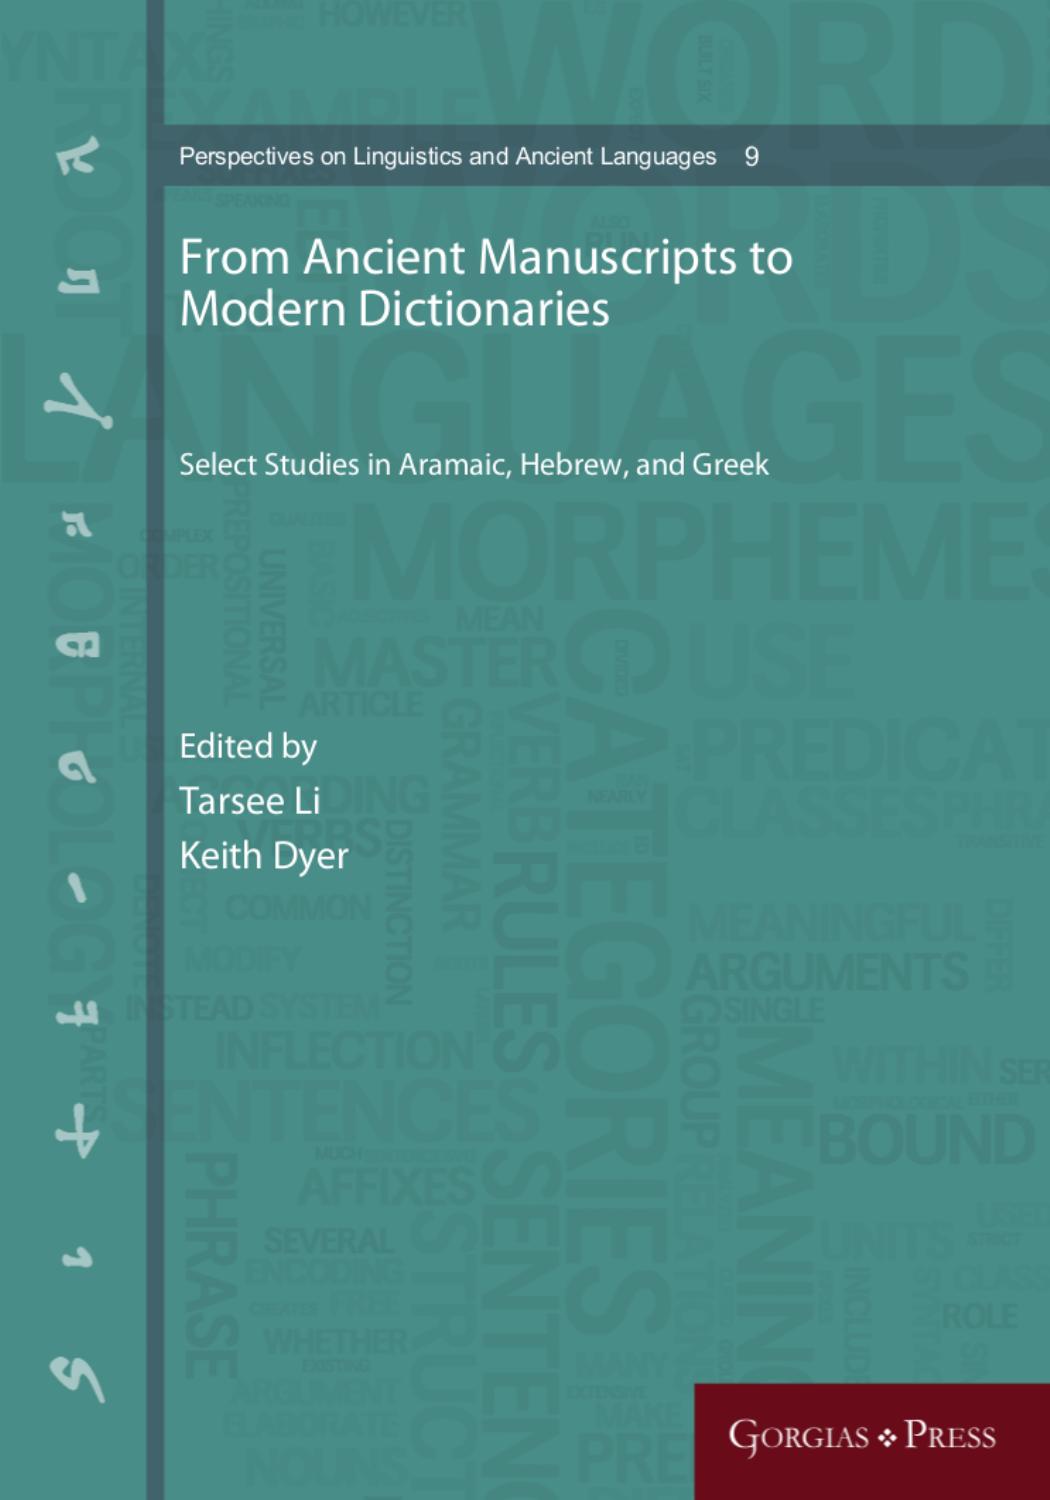 From Ancient Manuscripts to Modern Dictionaries: Select Studies in Aramaic, Hebrew, and Greek